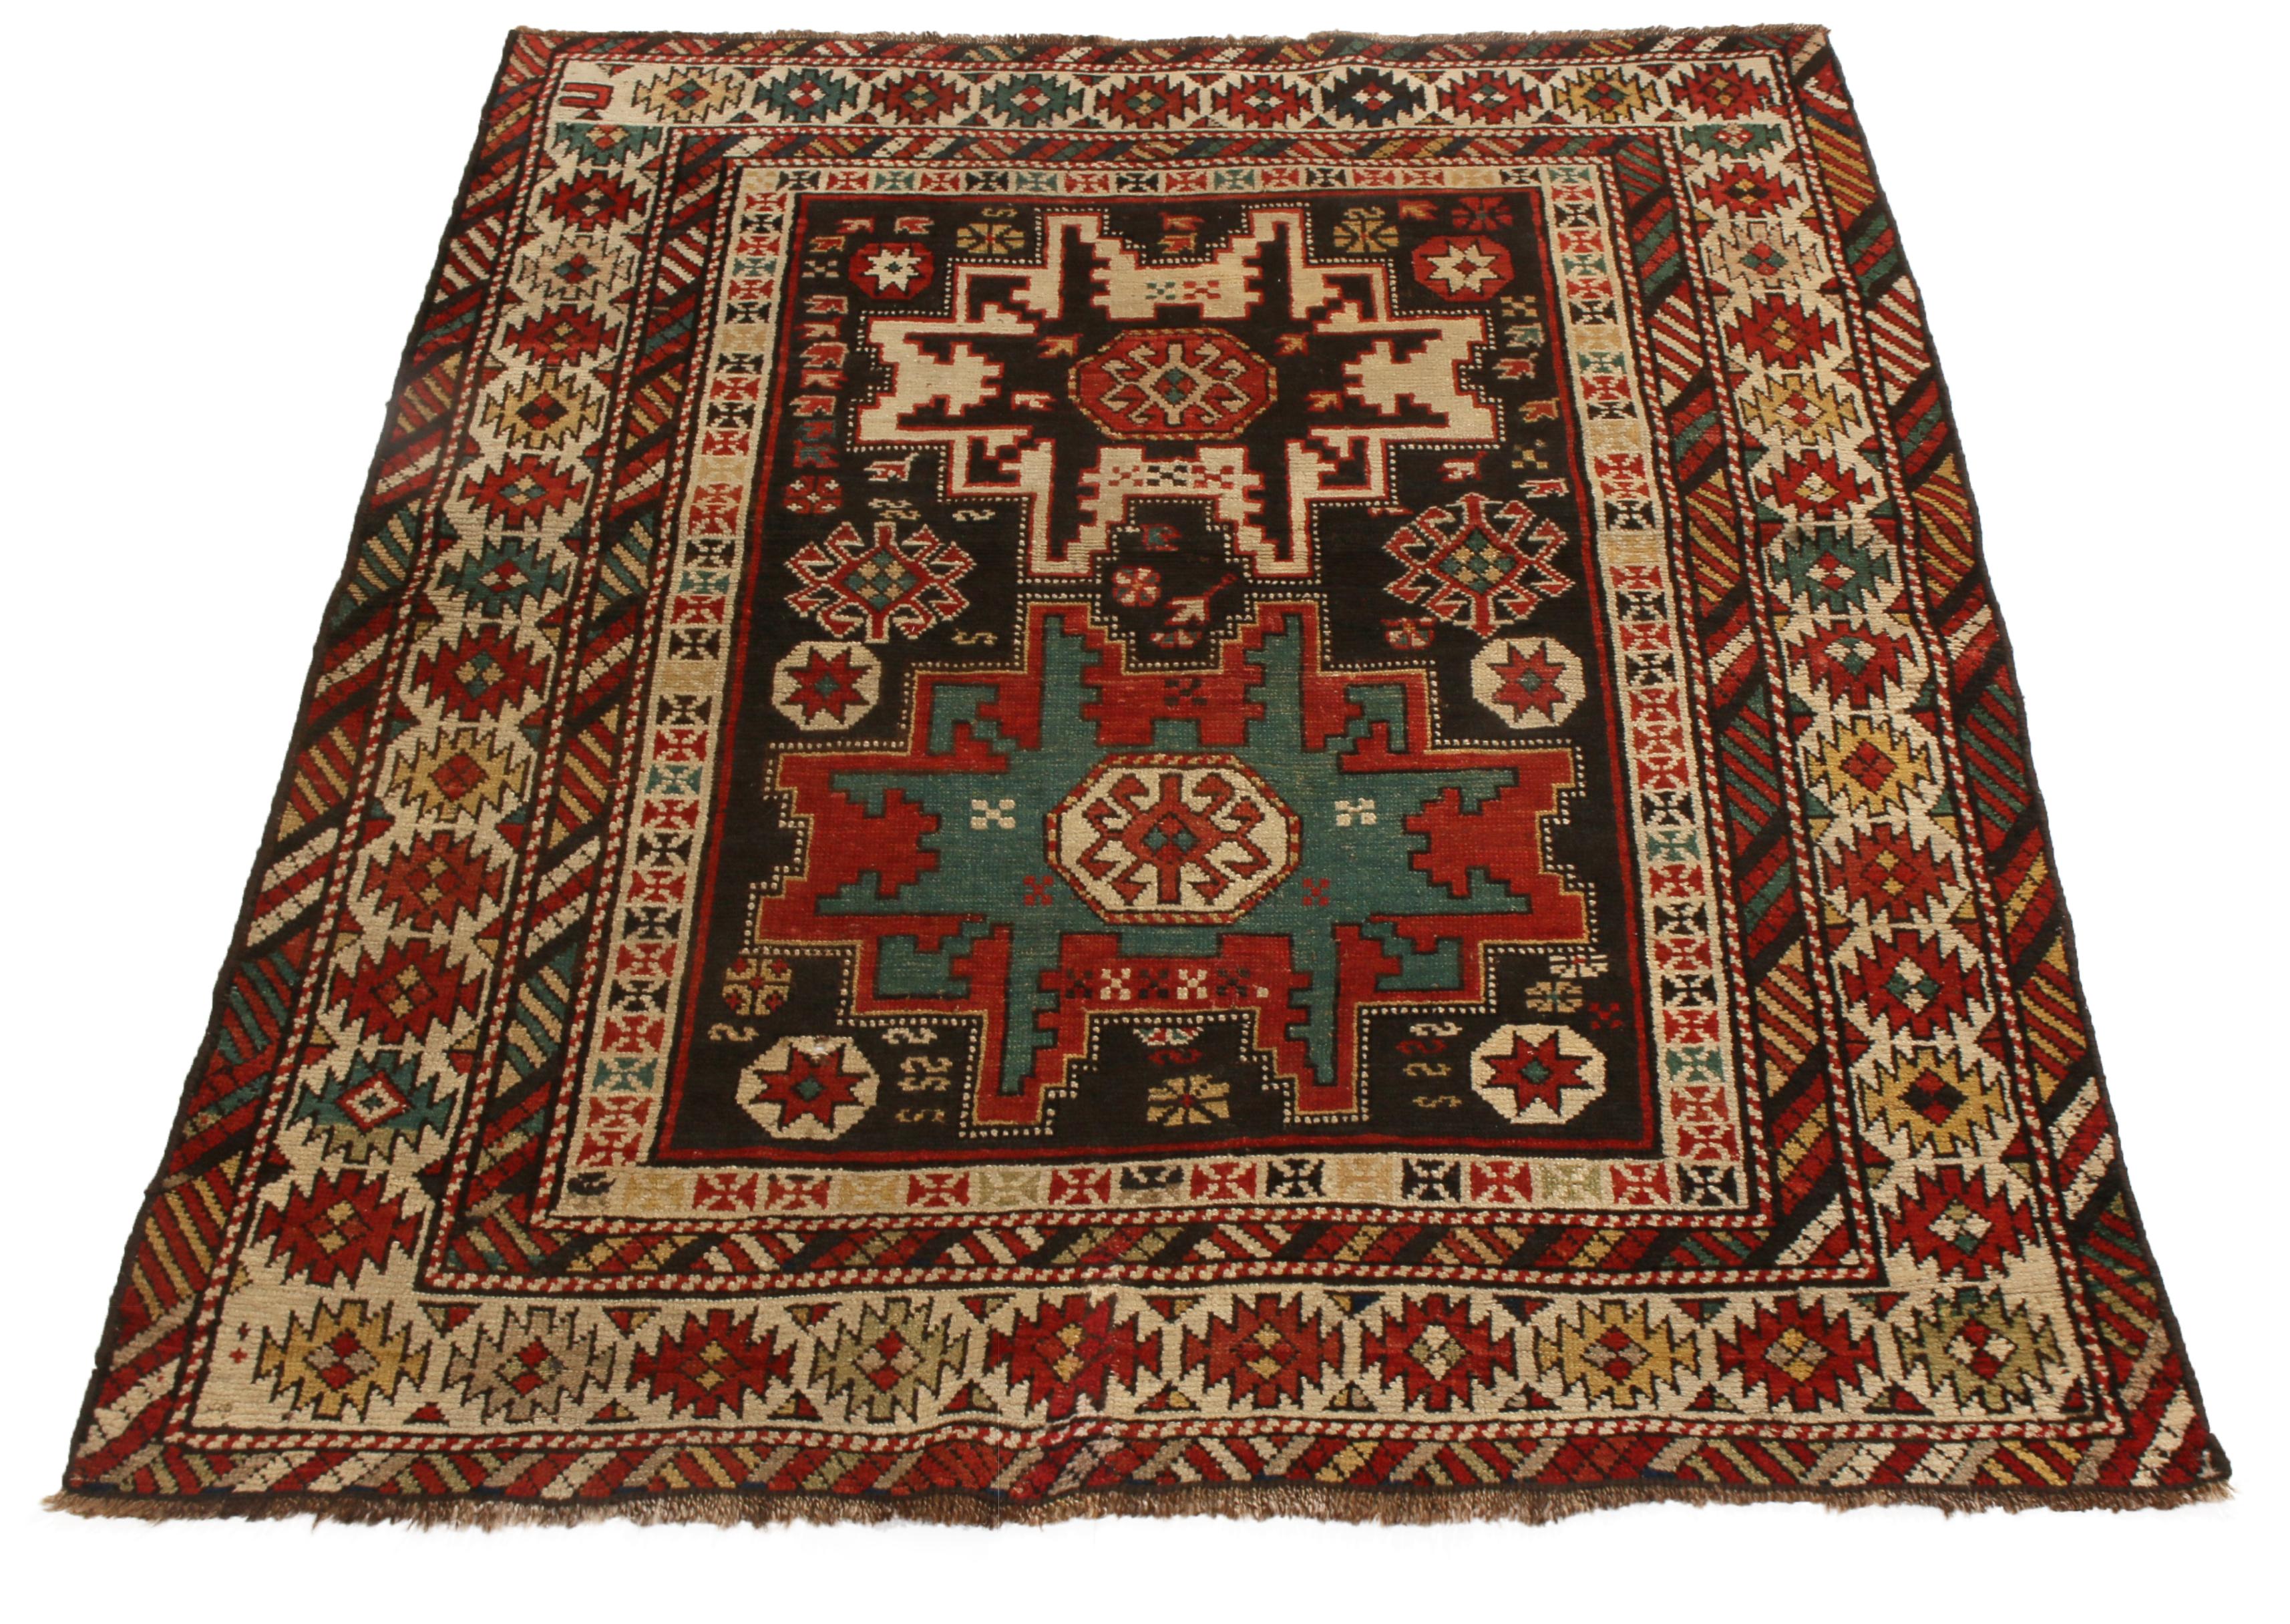 Originating from Russia in 1900, this antique traditional geometric rug features a distinct Lesgi Star design in tribal red, blue, beige, and black colorways. Hand knotted in high-quality wool, this design dates back to as early as the 16th century,